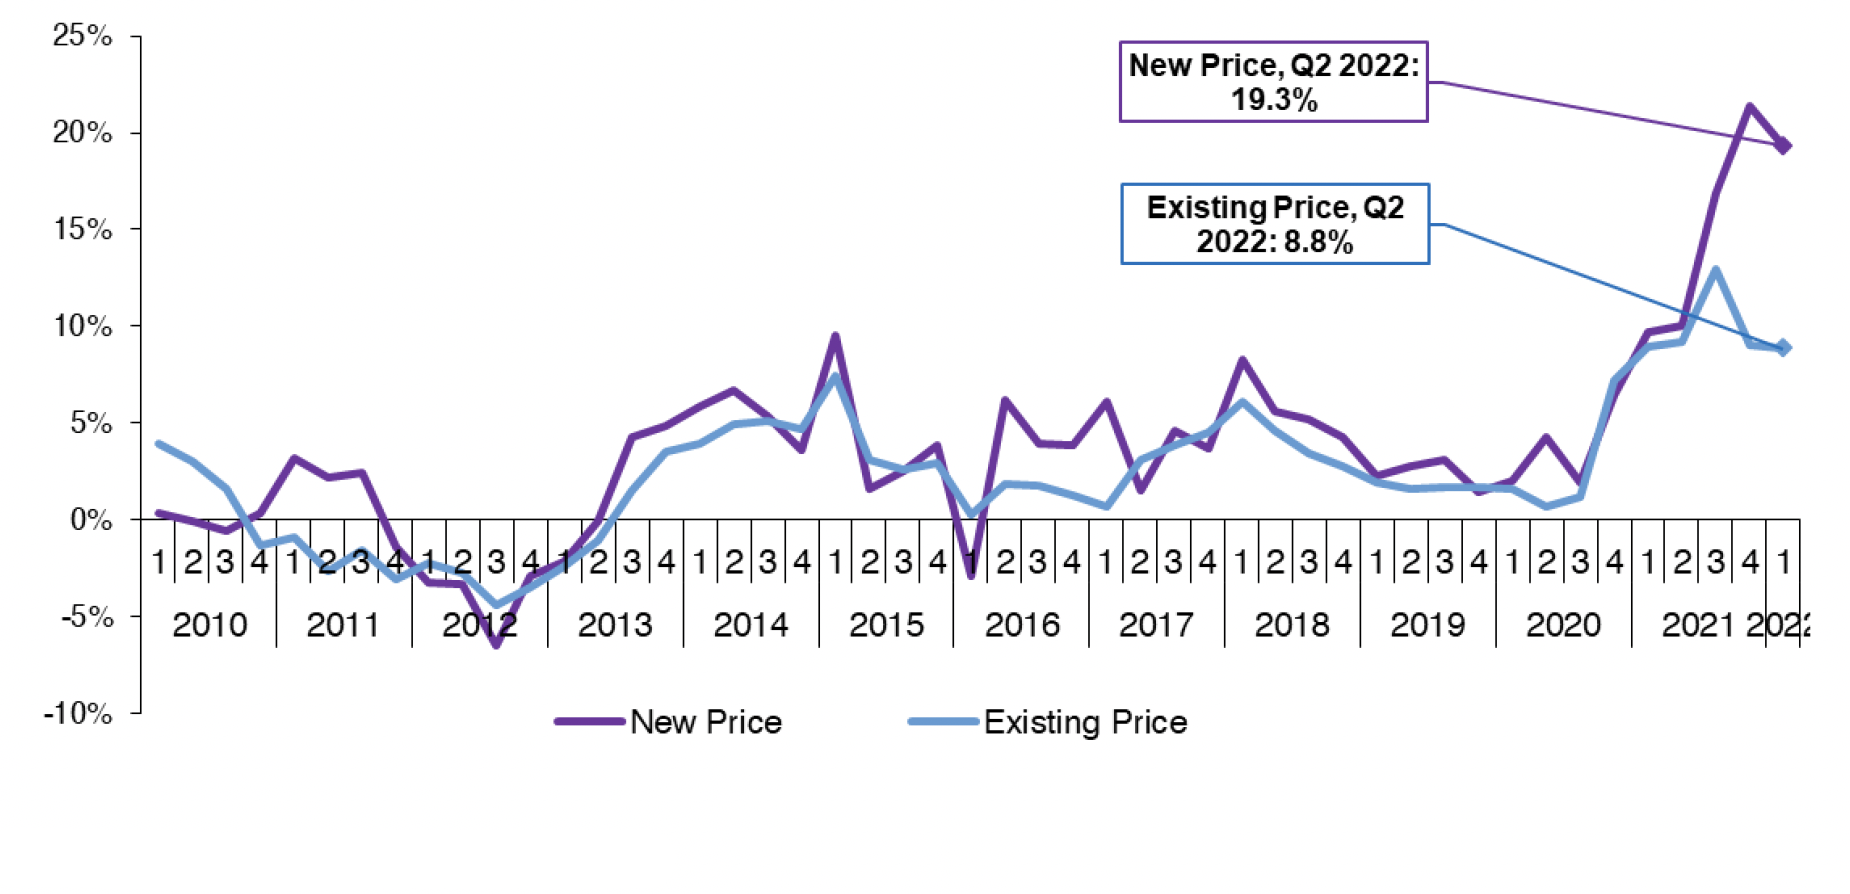 Chart 2.2 tracks the rate of change in the average new build price and the average existing build price on a quarterly basis from Q1 2010 to Q1 2022. 